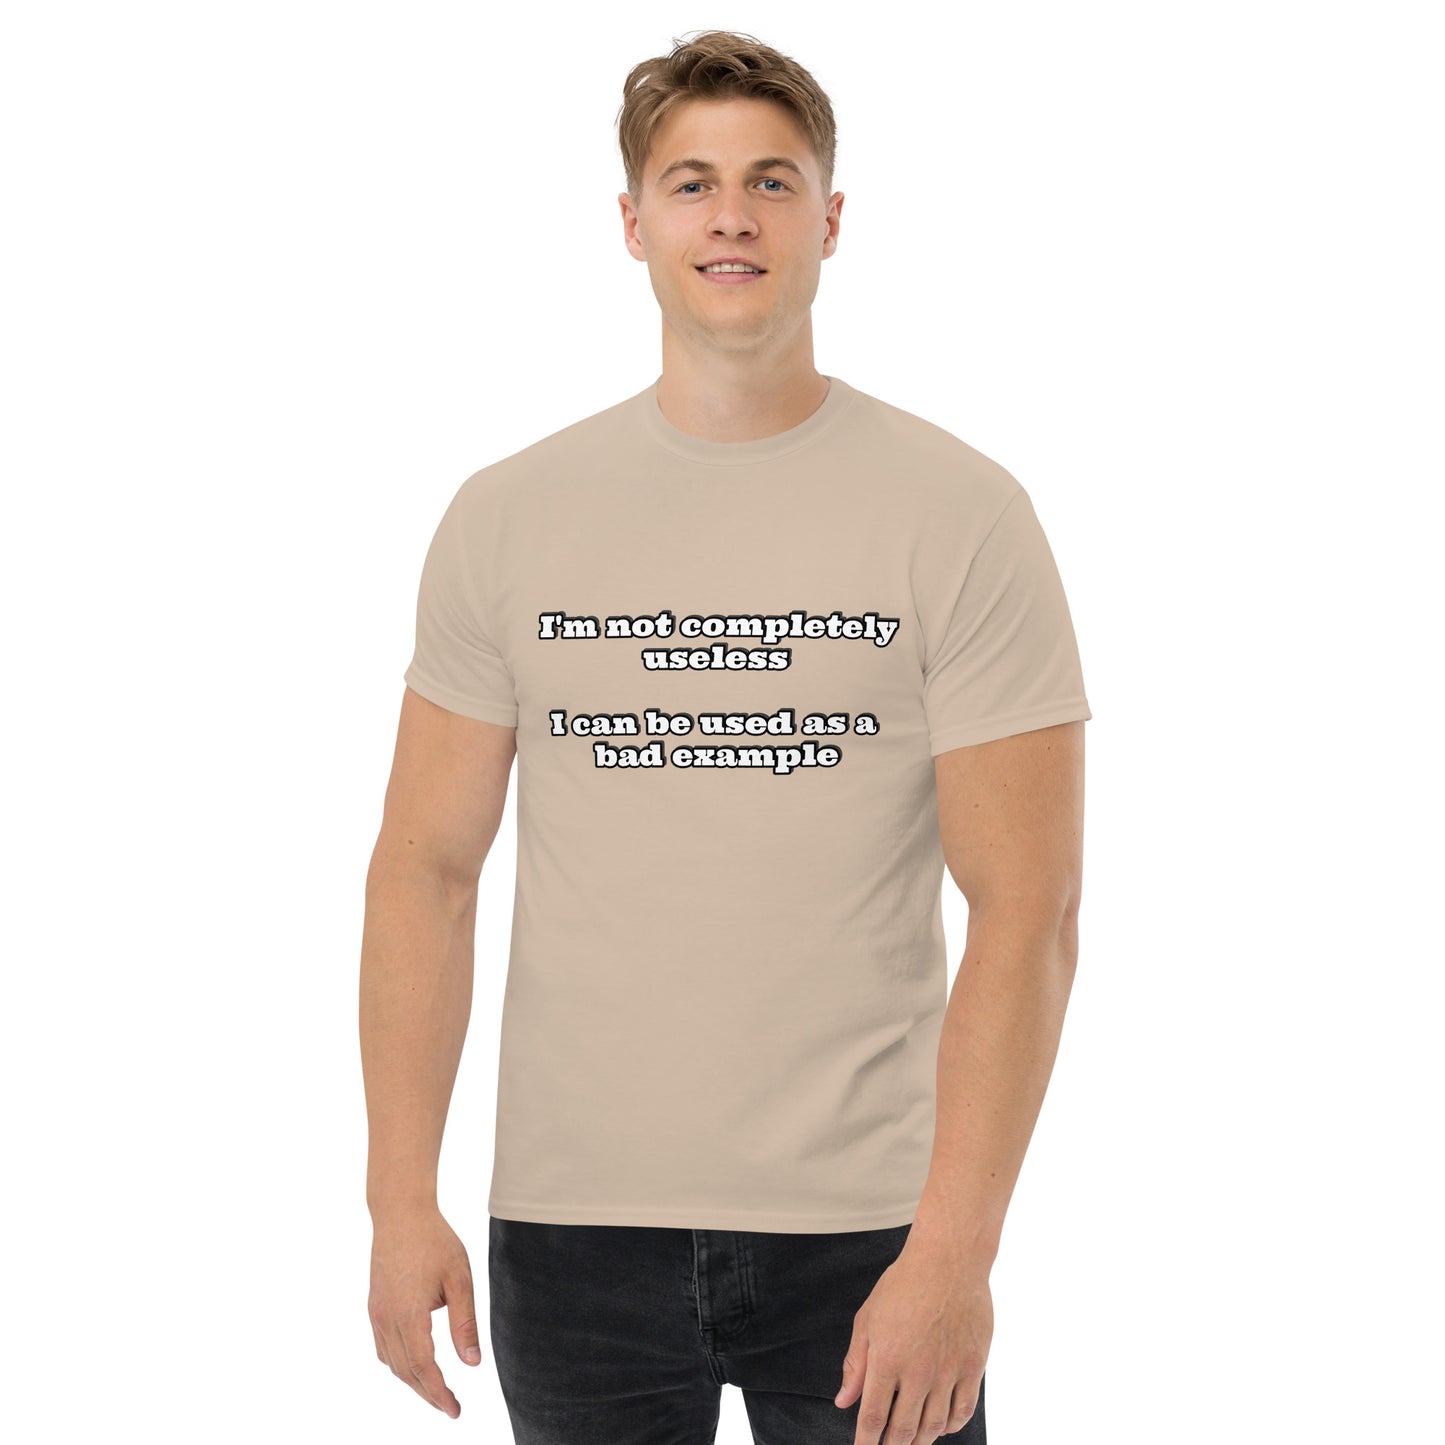 Men with sand t-shirt with text “I'm not completely useless I can be used as a bad example”